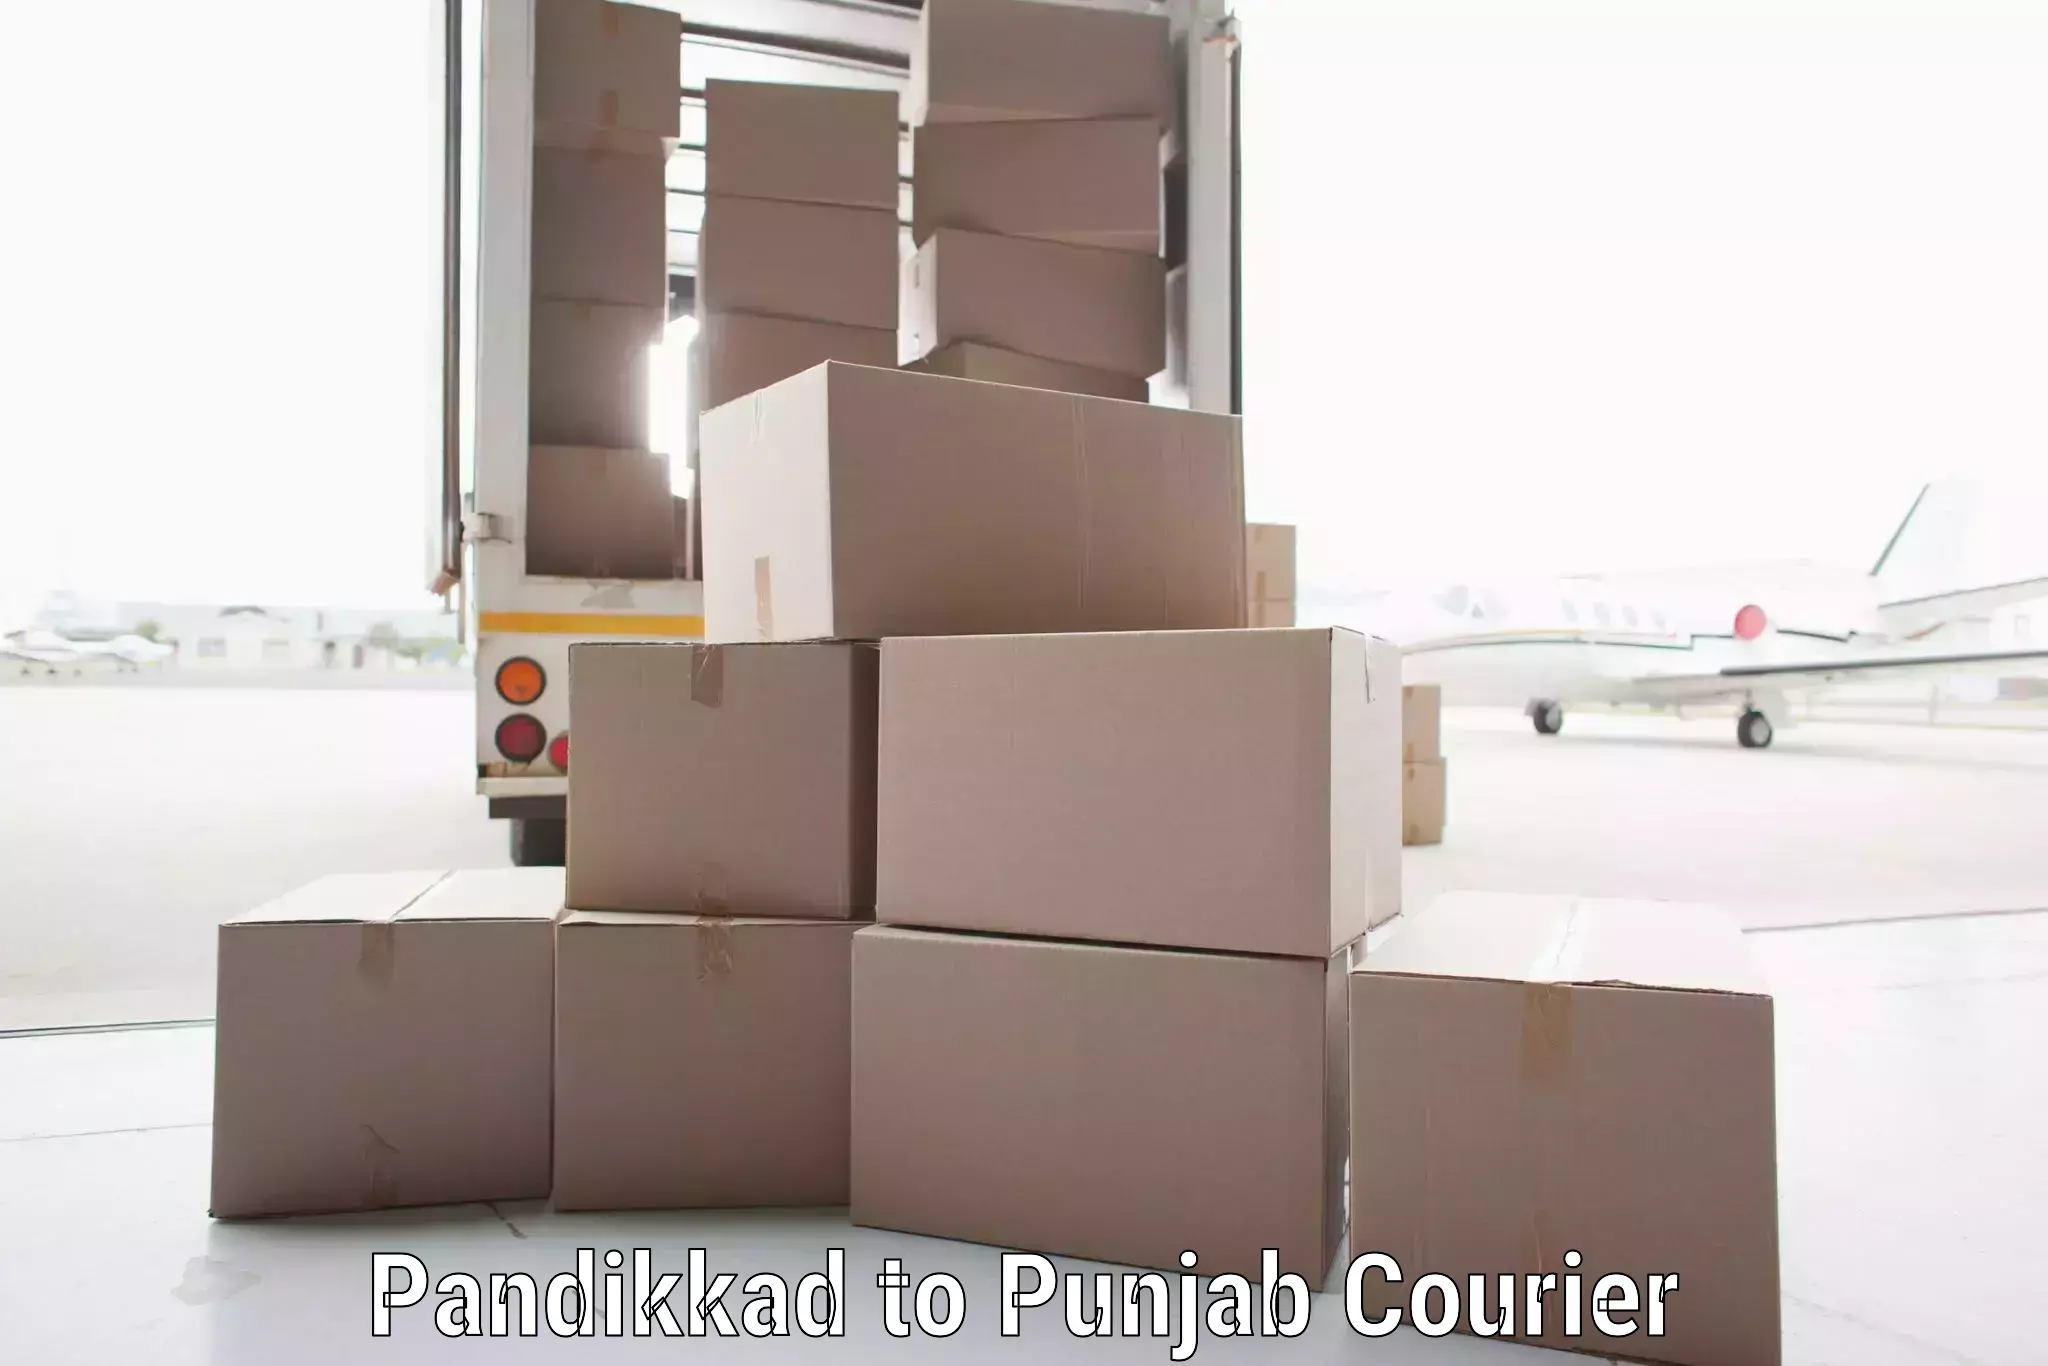 Easy access courier services Pandikkad to Punjab